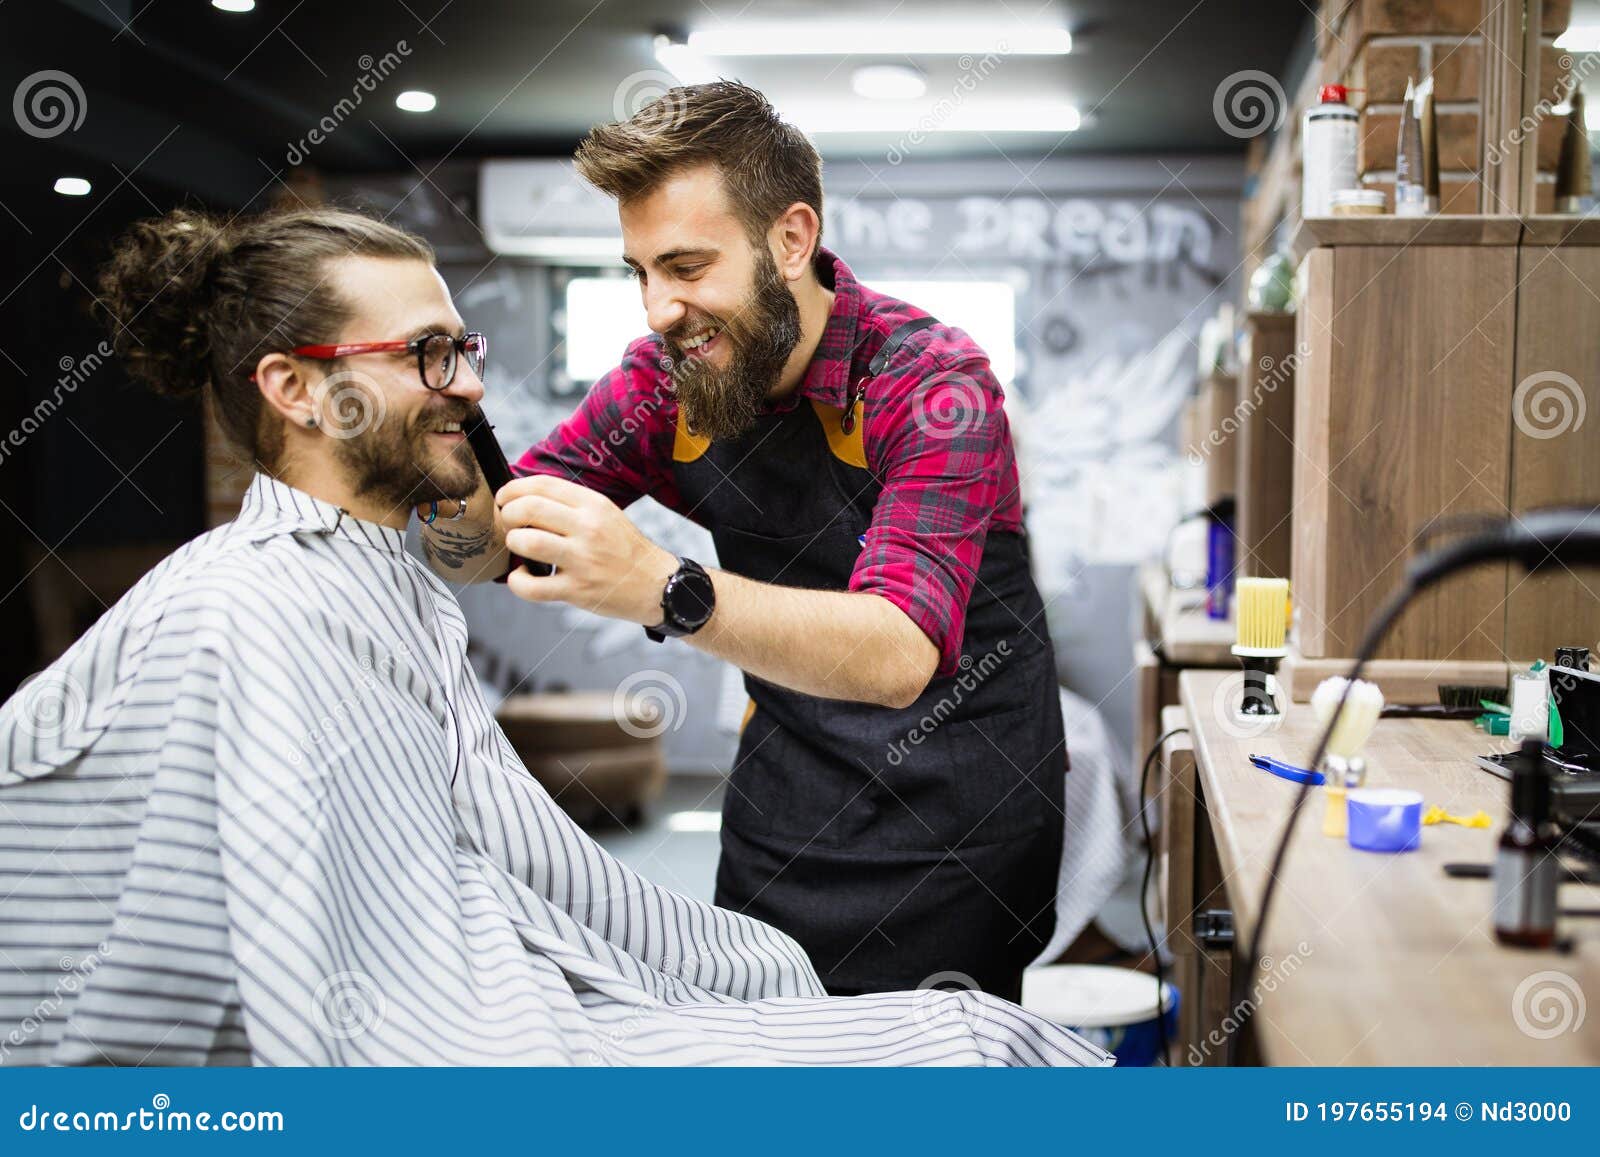 Client during Beard Shaving in Barber Shop Stock Photo - Image of care ...